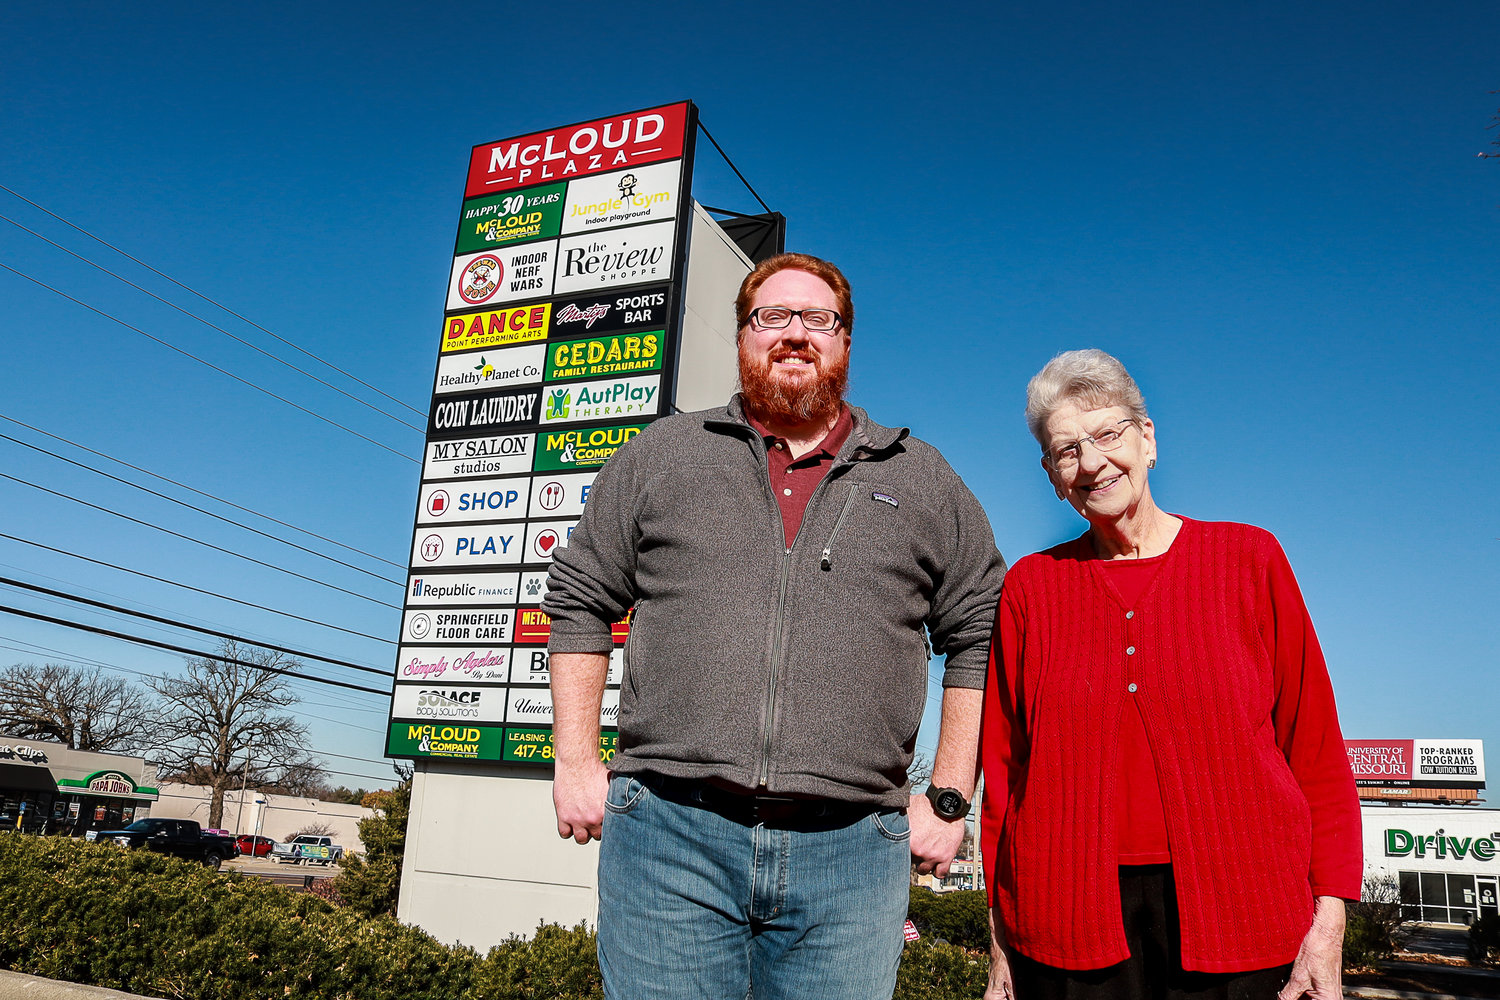 Joseph McLoud and Carol Bell are working toward the future of McLoud and Co., which renamed Sheid's Plaza in honor of company founders Tom and Jill McLoud.